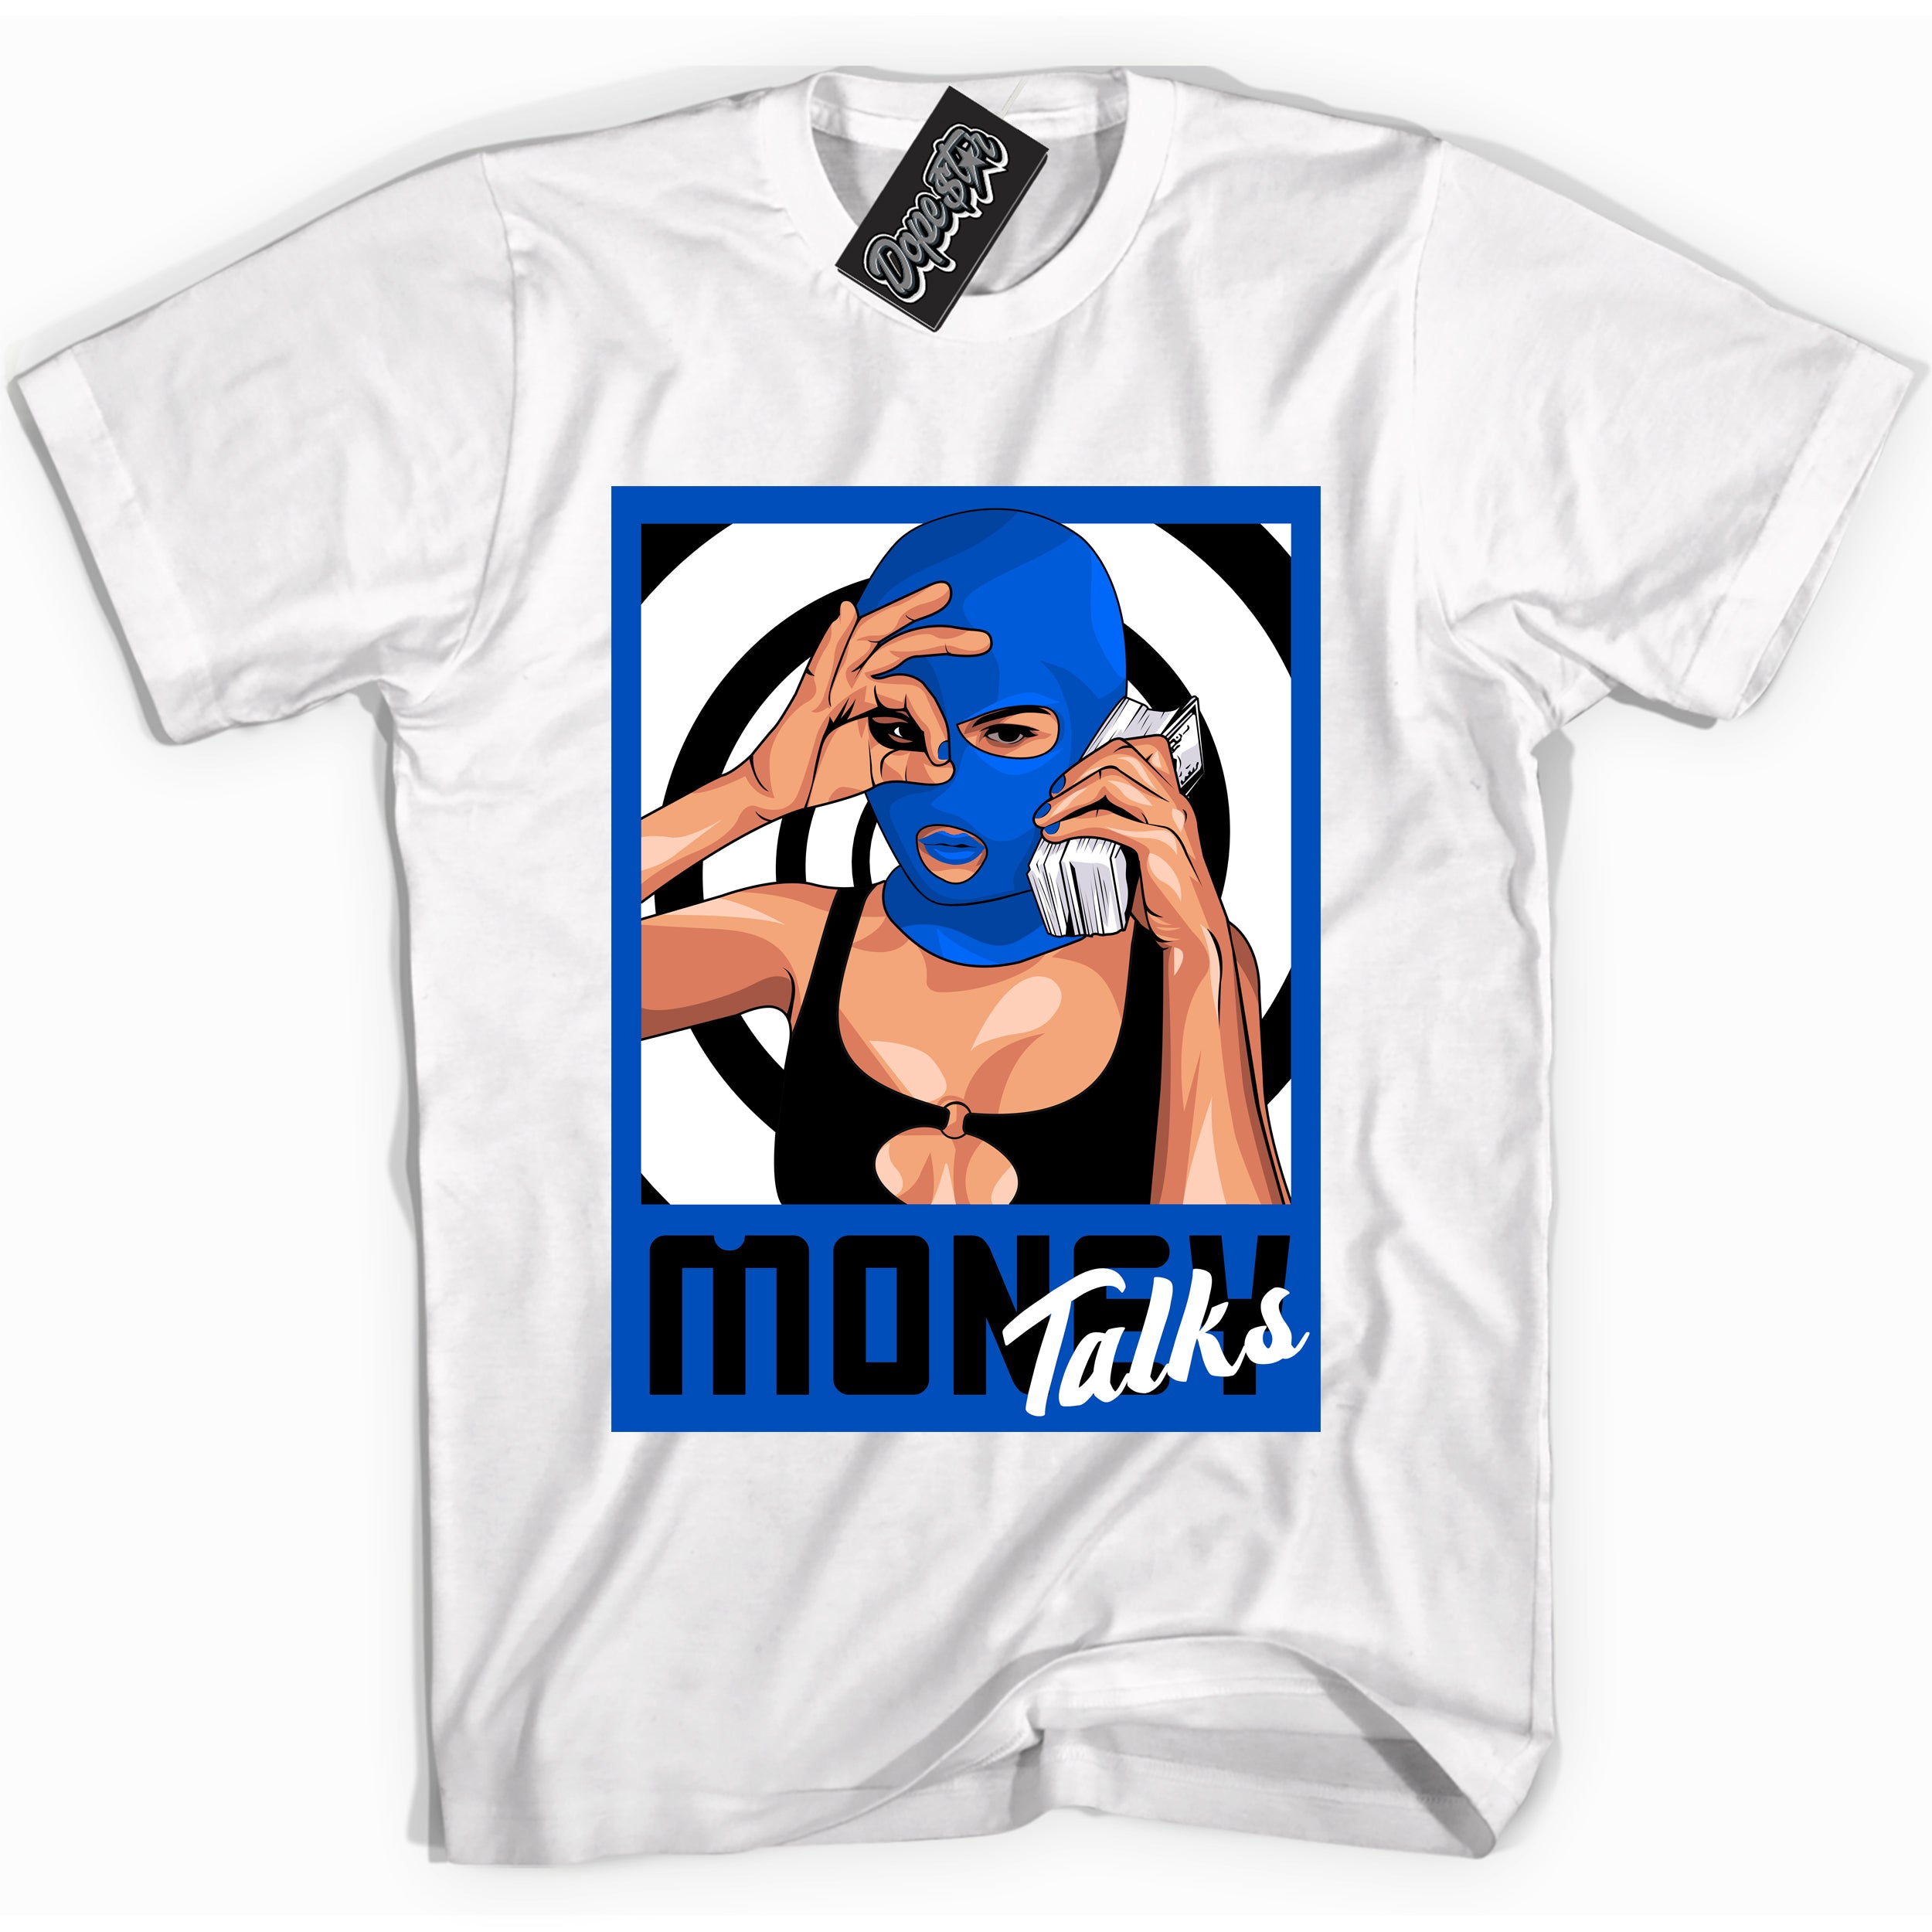 Cool White graphic tee with Money Talks print, that perfectly matches OG Royal Reimagined 1s sneakers 